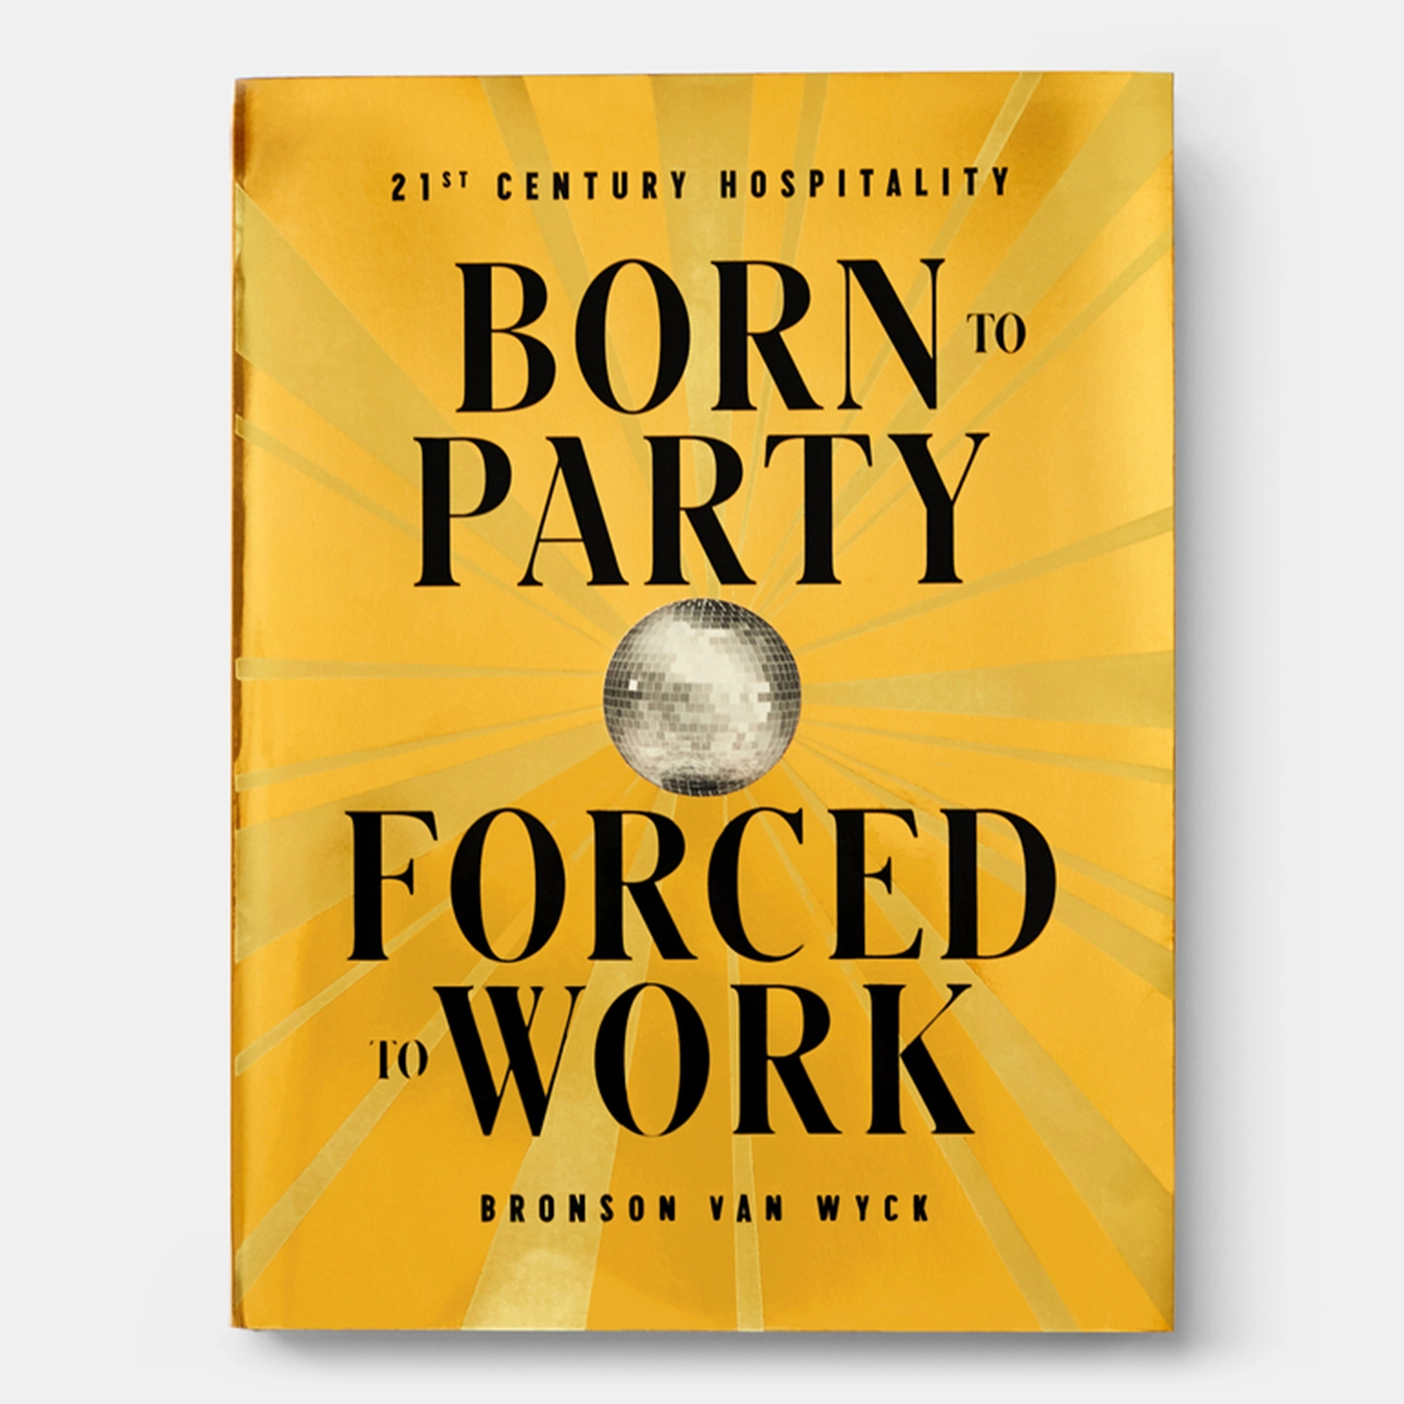 Born to party, forced to work: 21st century hospitality